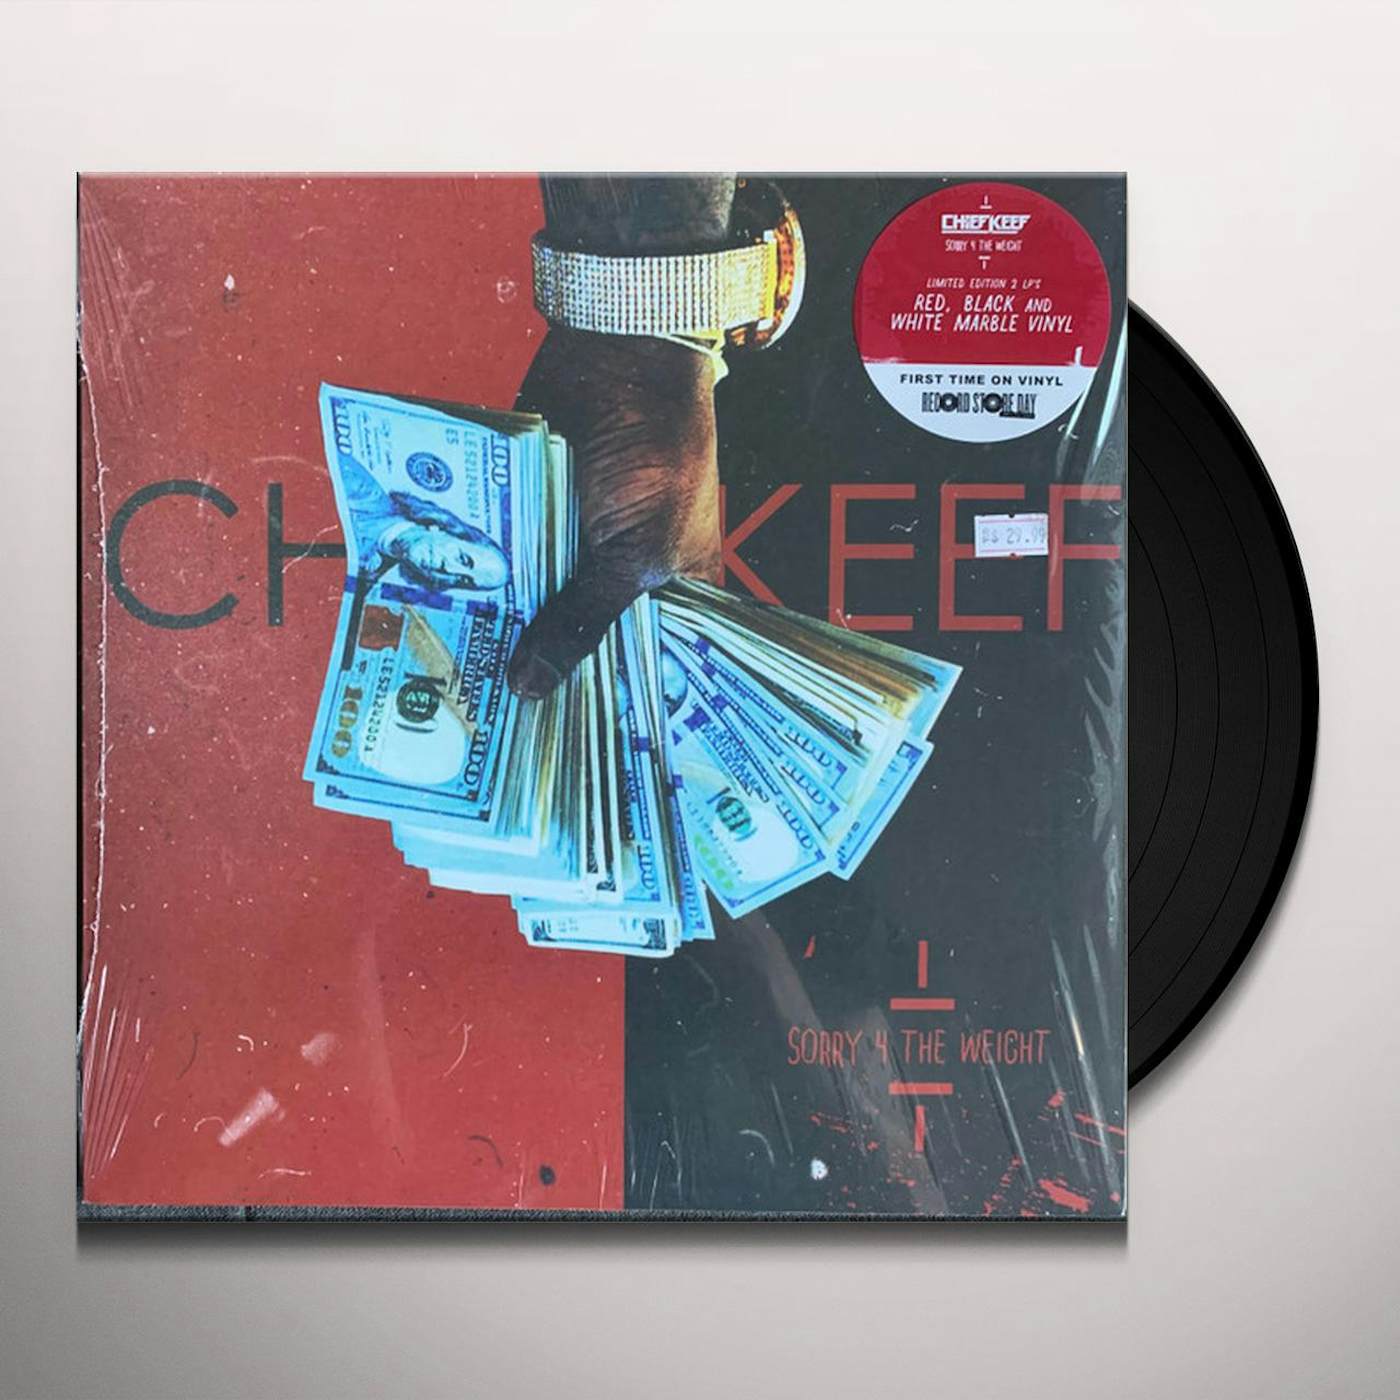 Chief Keef SORRY 4 THE WEIGHT (DELUXE EDITION) (RSD) Vinyl Record